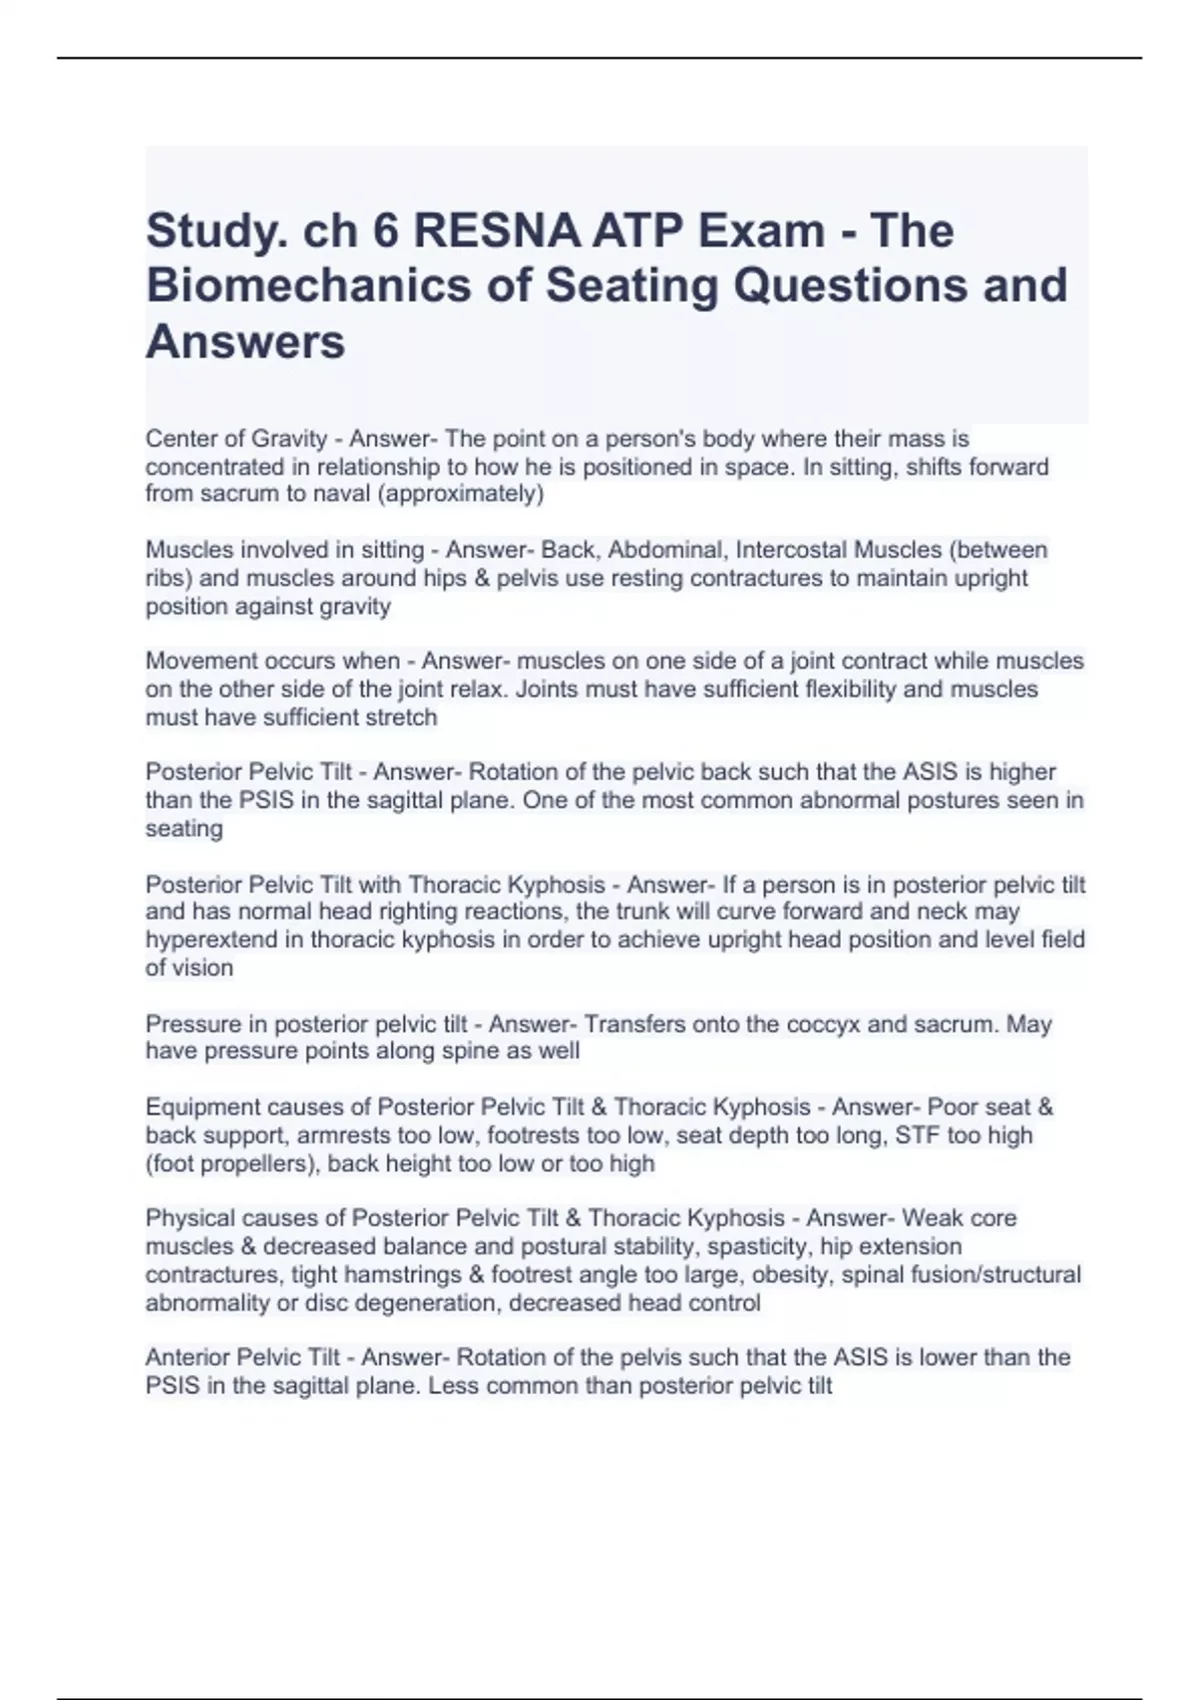 Study. ch 6 RESNA ATP Exam - The Biomechanics of Seating Questions and  Answers - RESNA ATP - Stuvia US